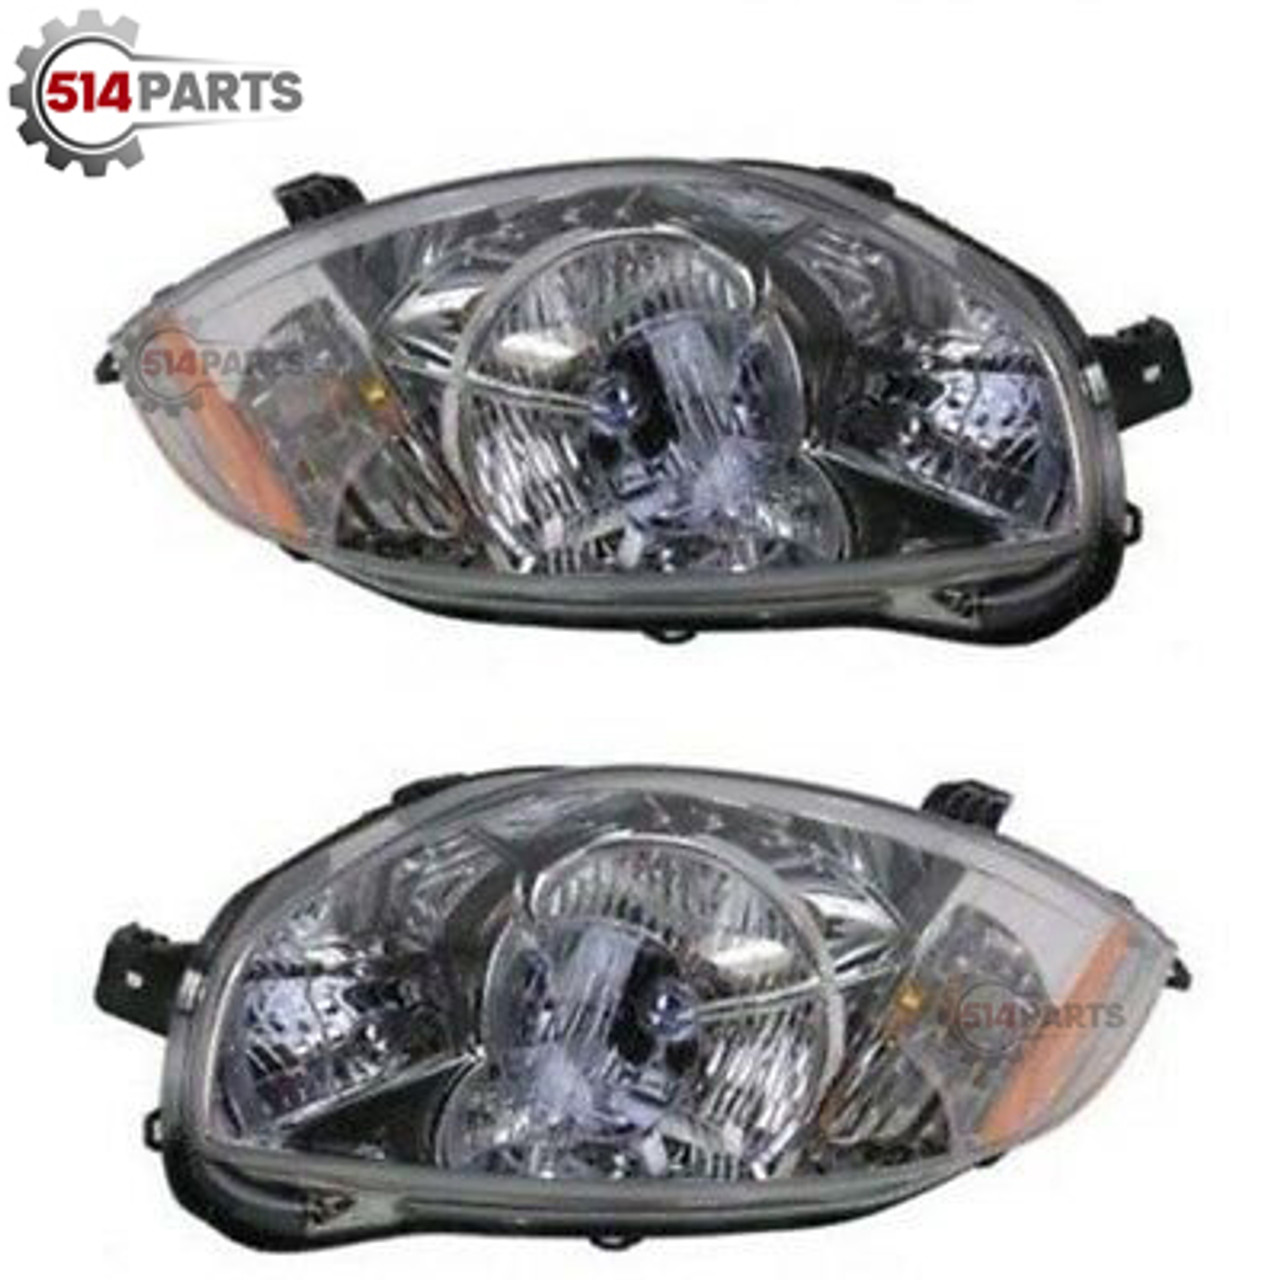 2007 - 2012 MITSUBISHI ECLIPSE and ECLIPSE SPYDER CONVERTIBLE 2.4L HEADLIGHTS High Quality - PHARES AVANT Haute Qualite